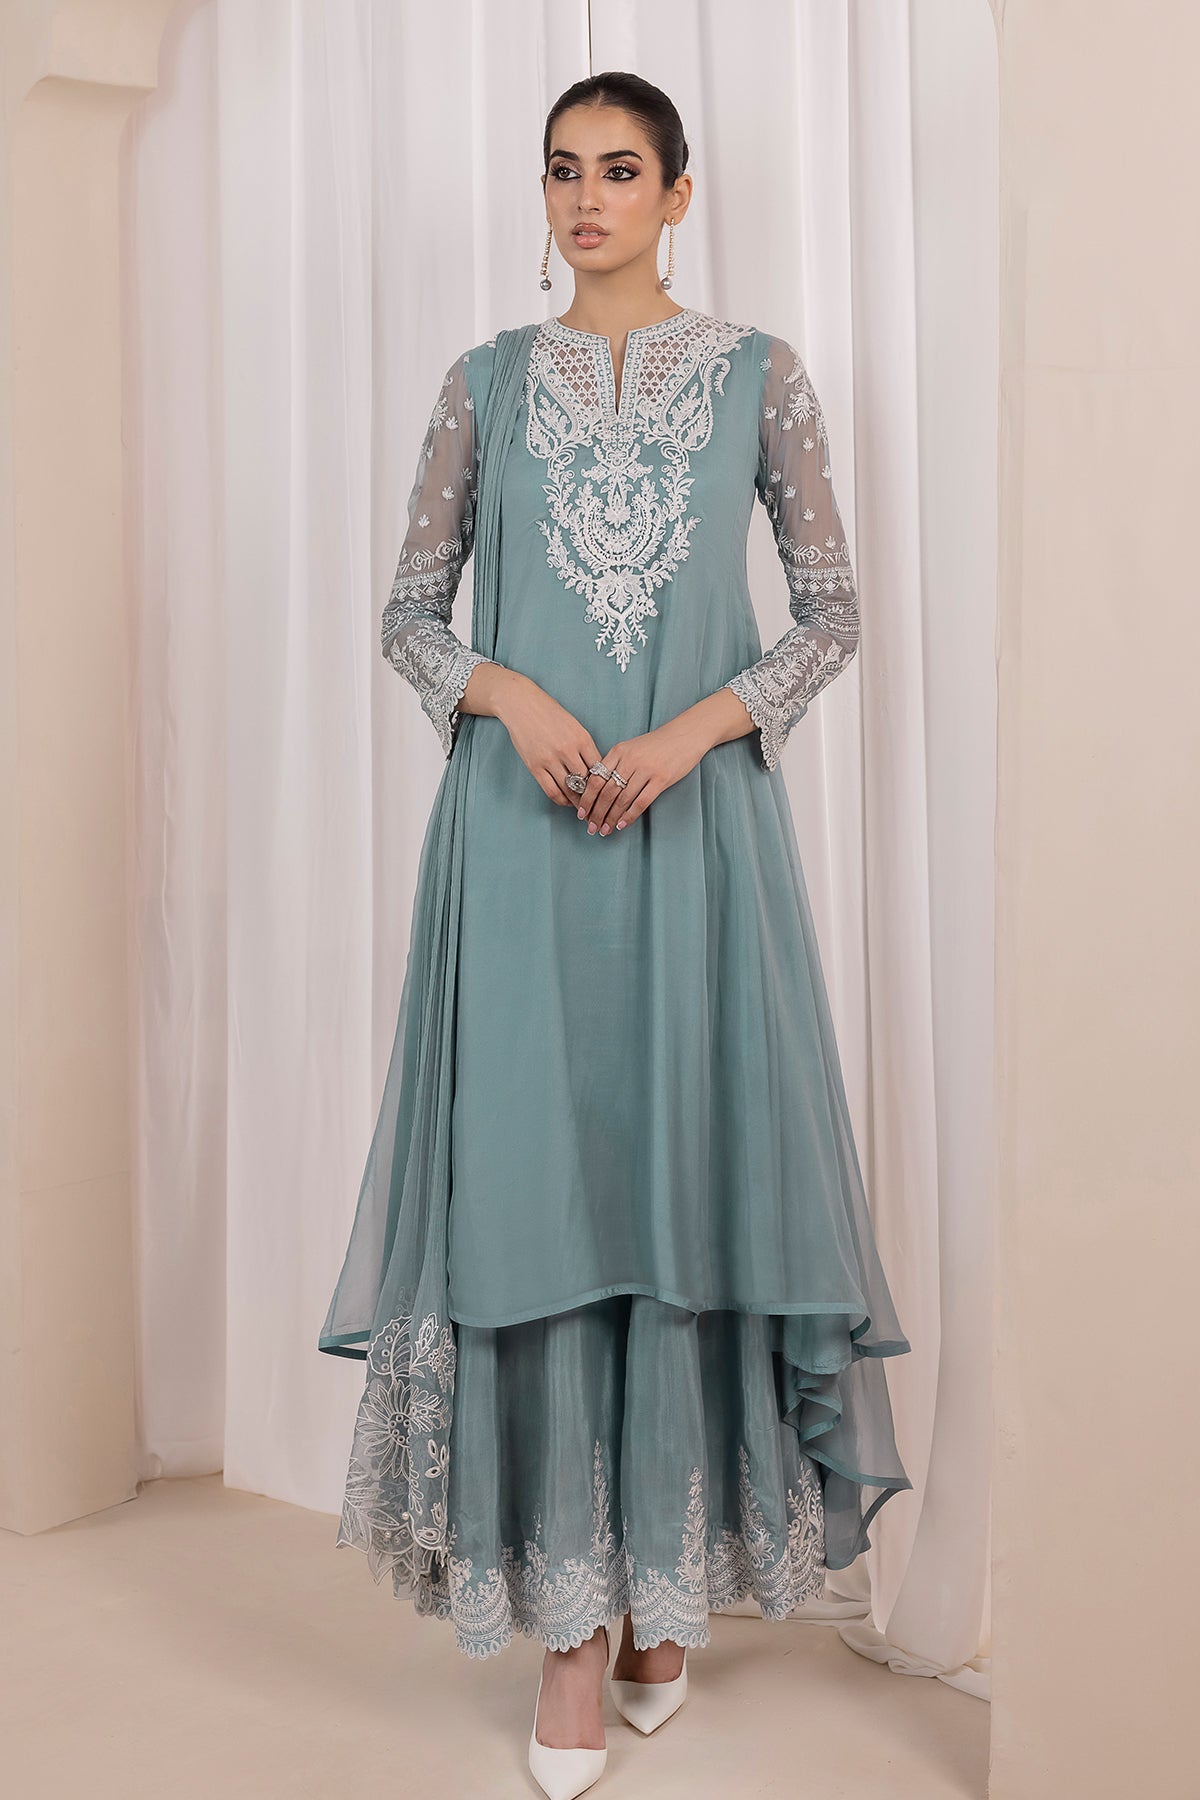 EMBROIDERED CHIFFON FROCK PR-845